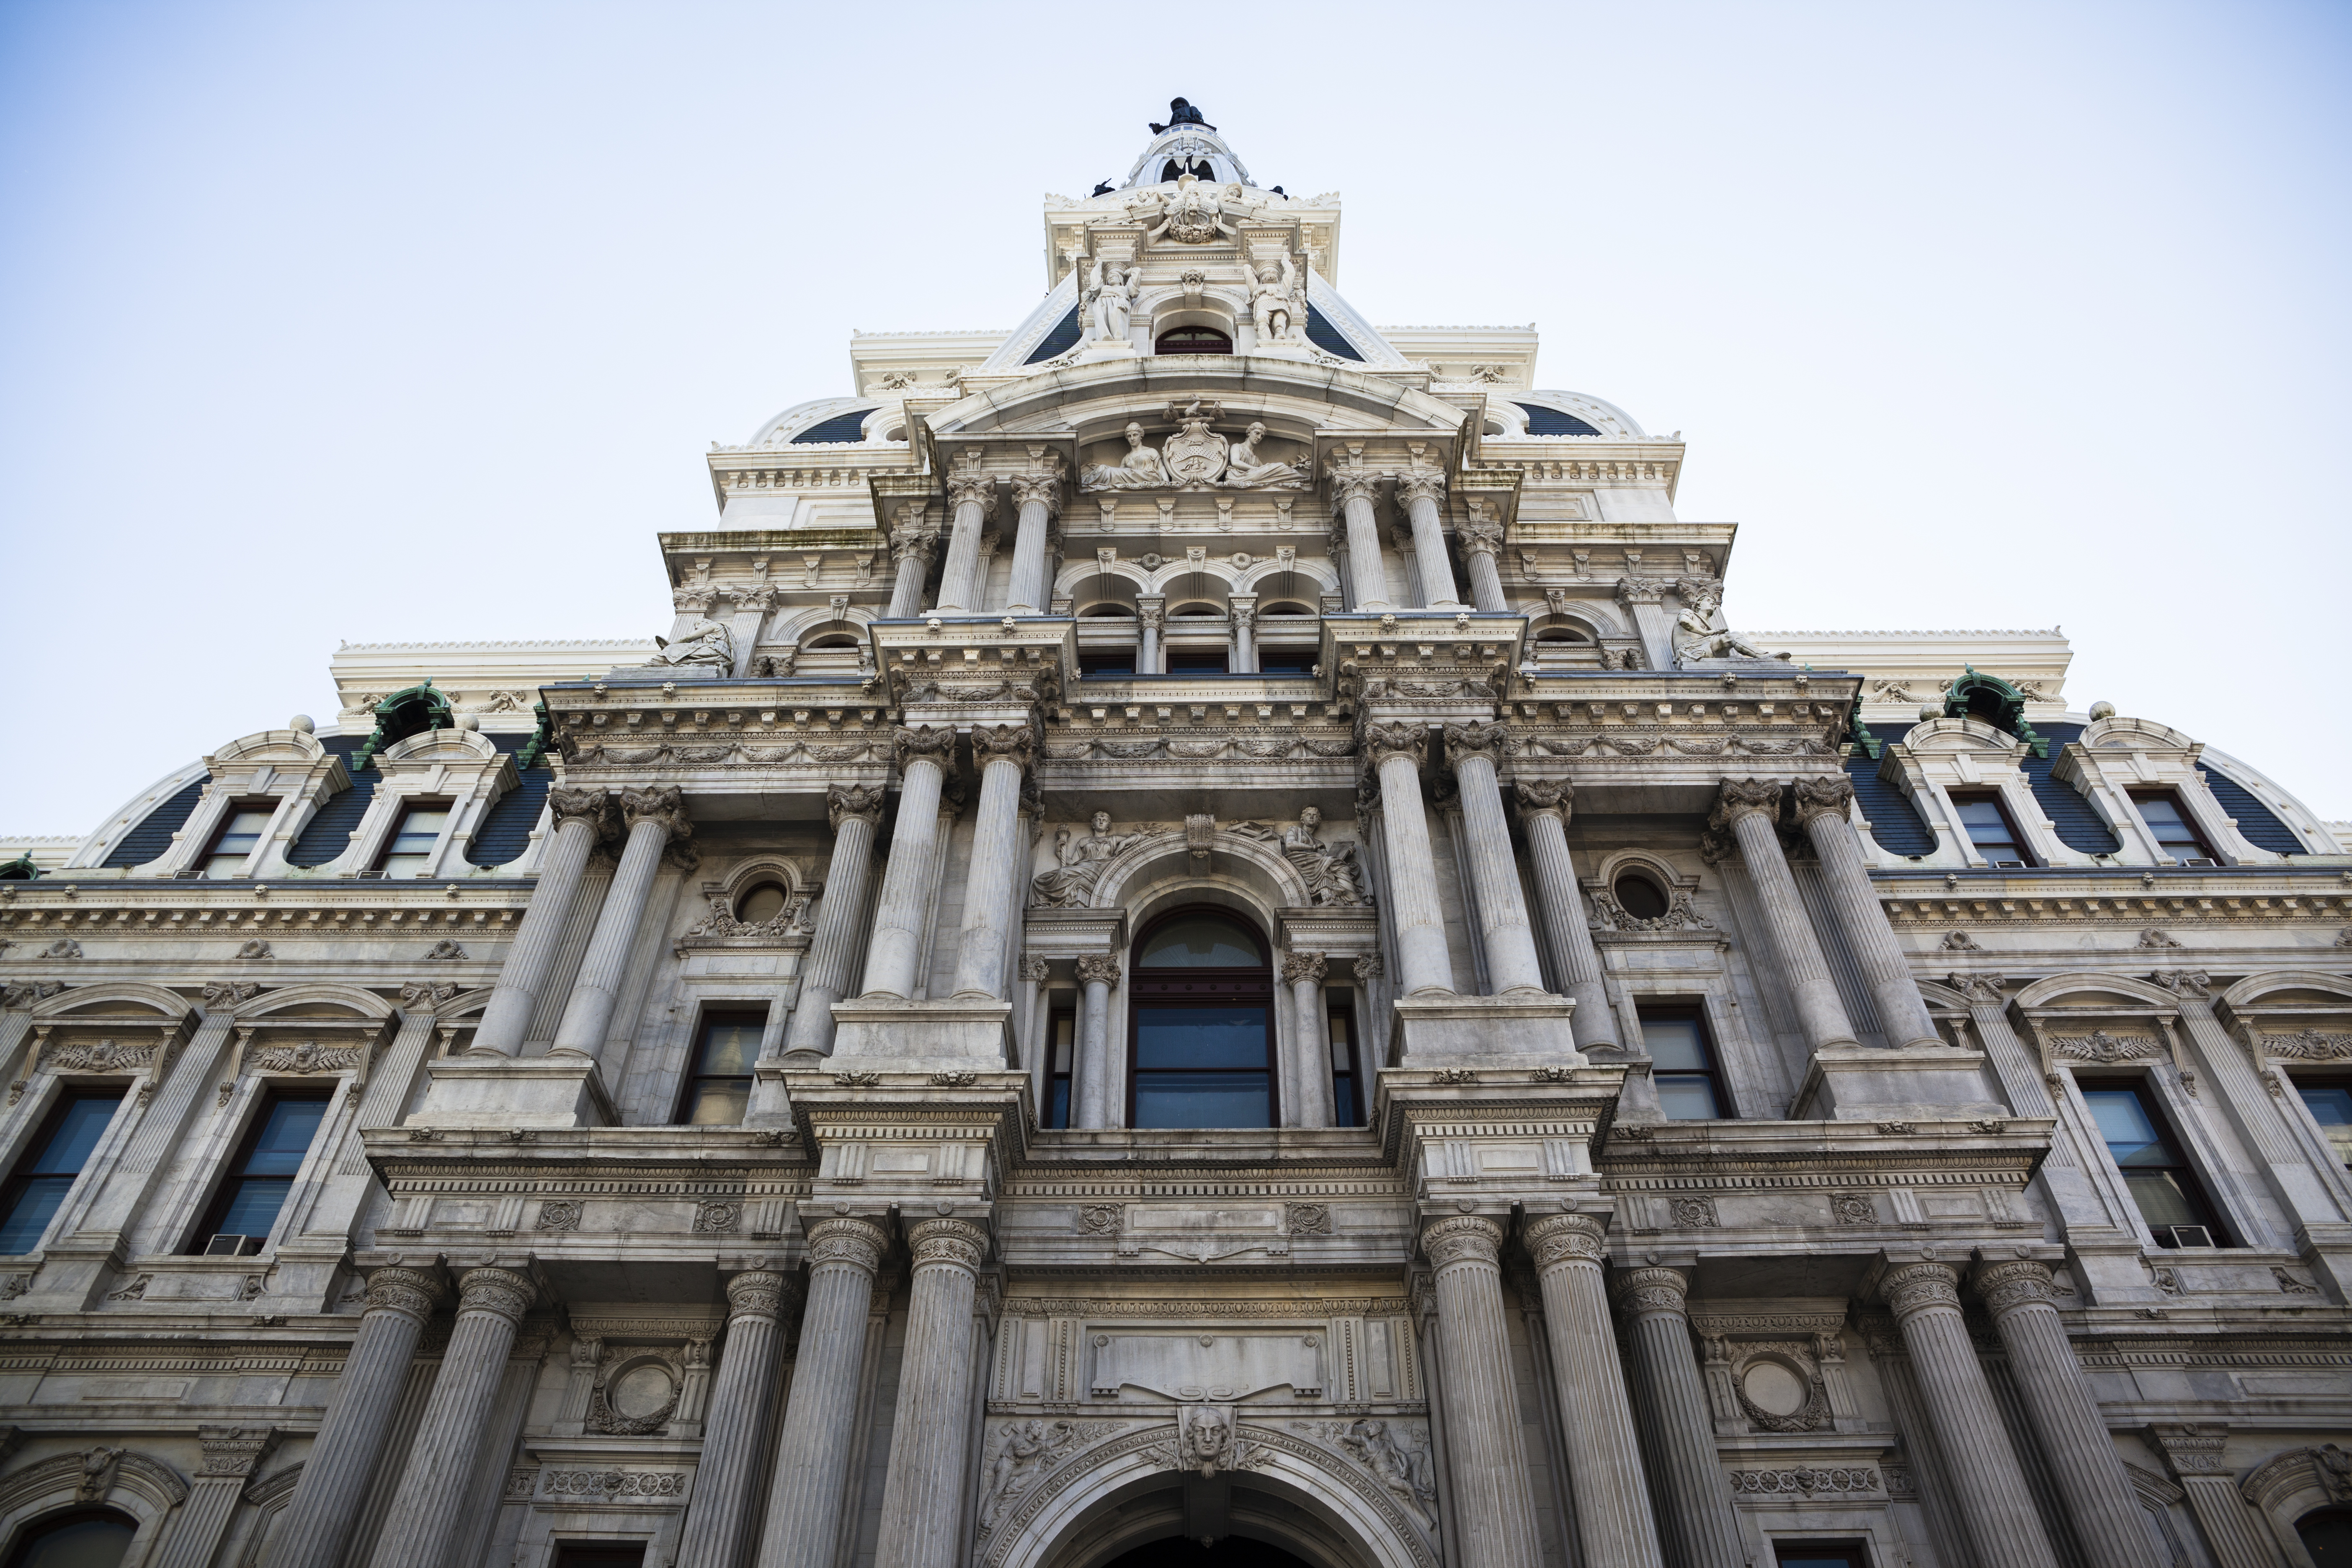 The exterior of Philadelphia City Hall. The facade is elaborately decorated with multiple columns and windows.